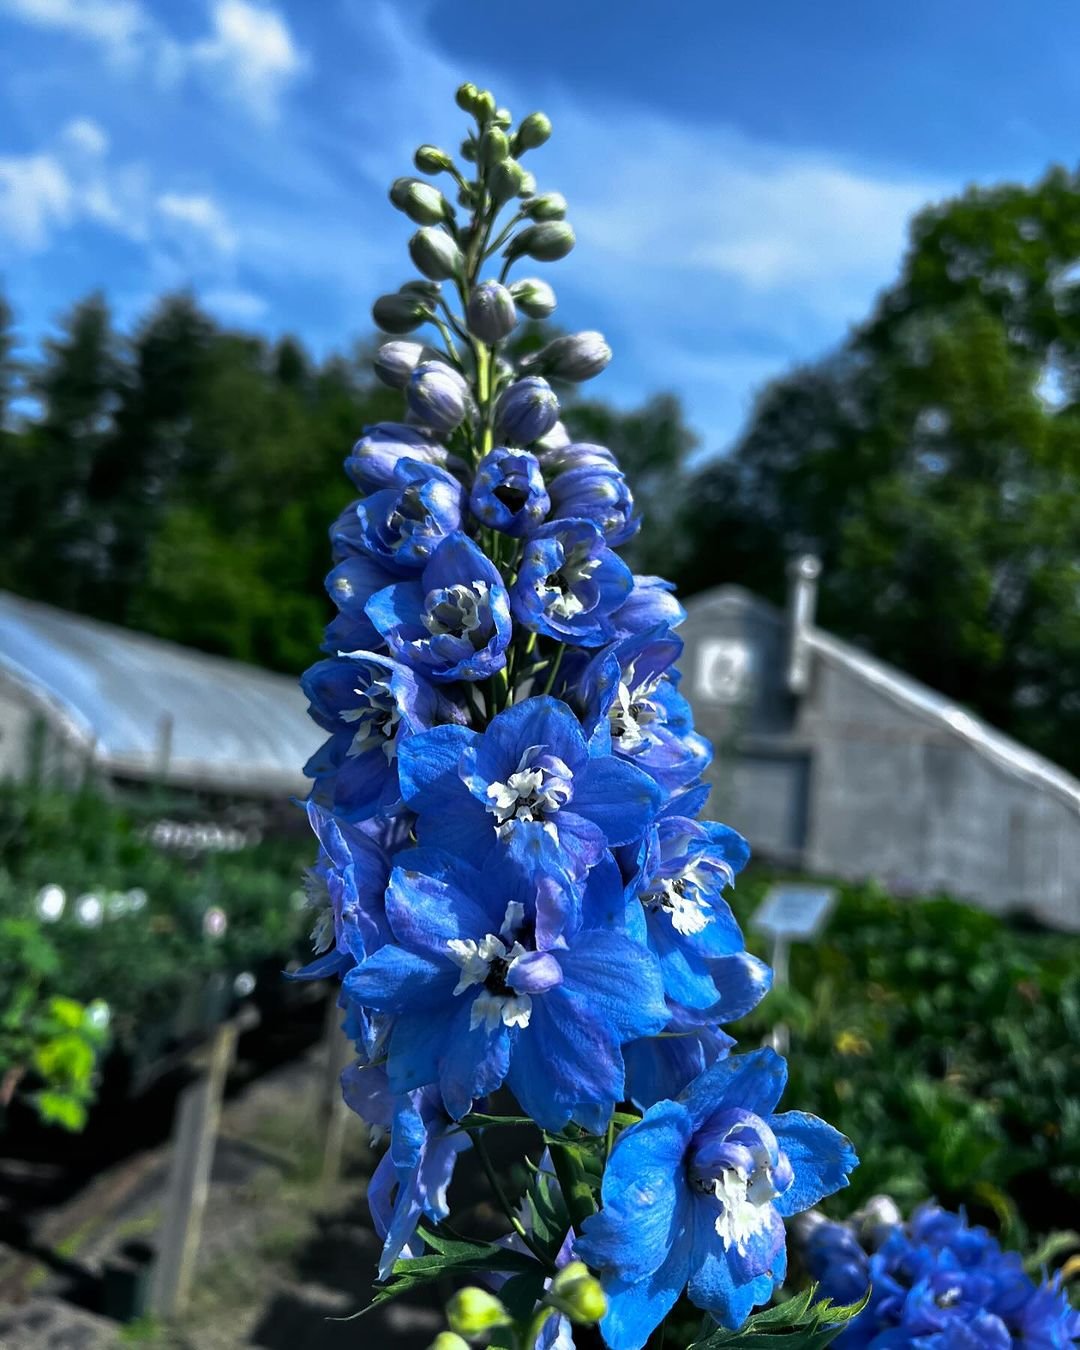  Vibrant blue Delphinium flowers in a greenhouse with a clear blue sky.